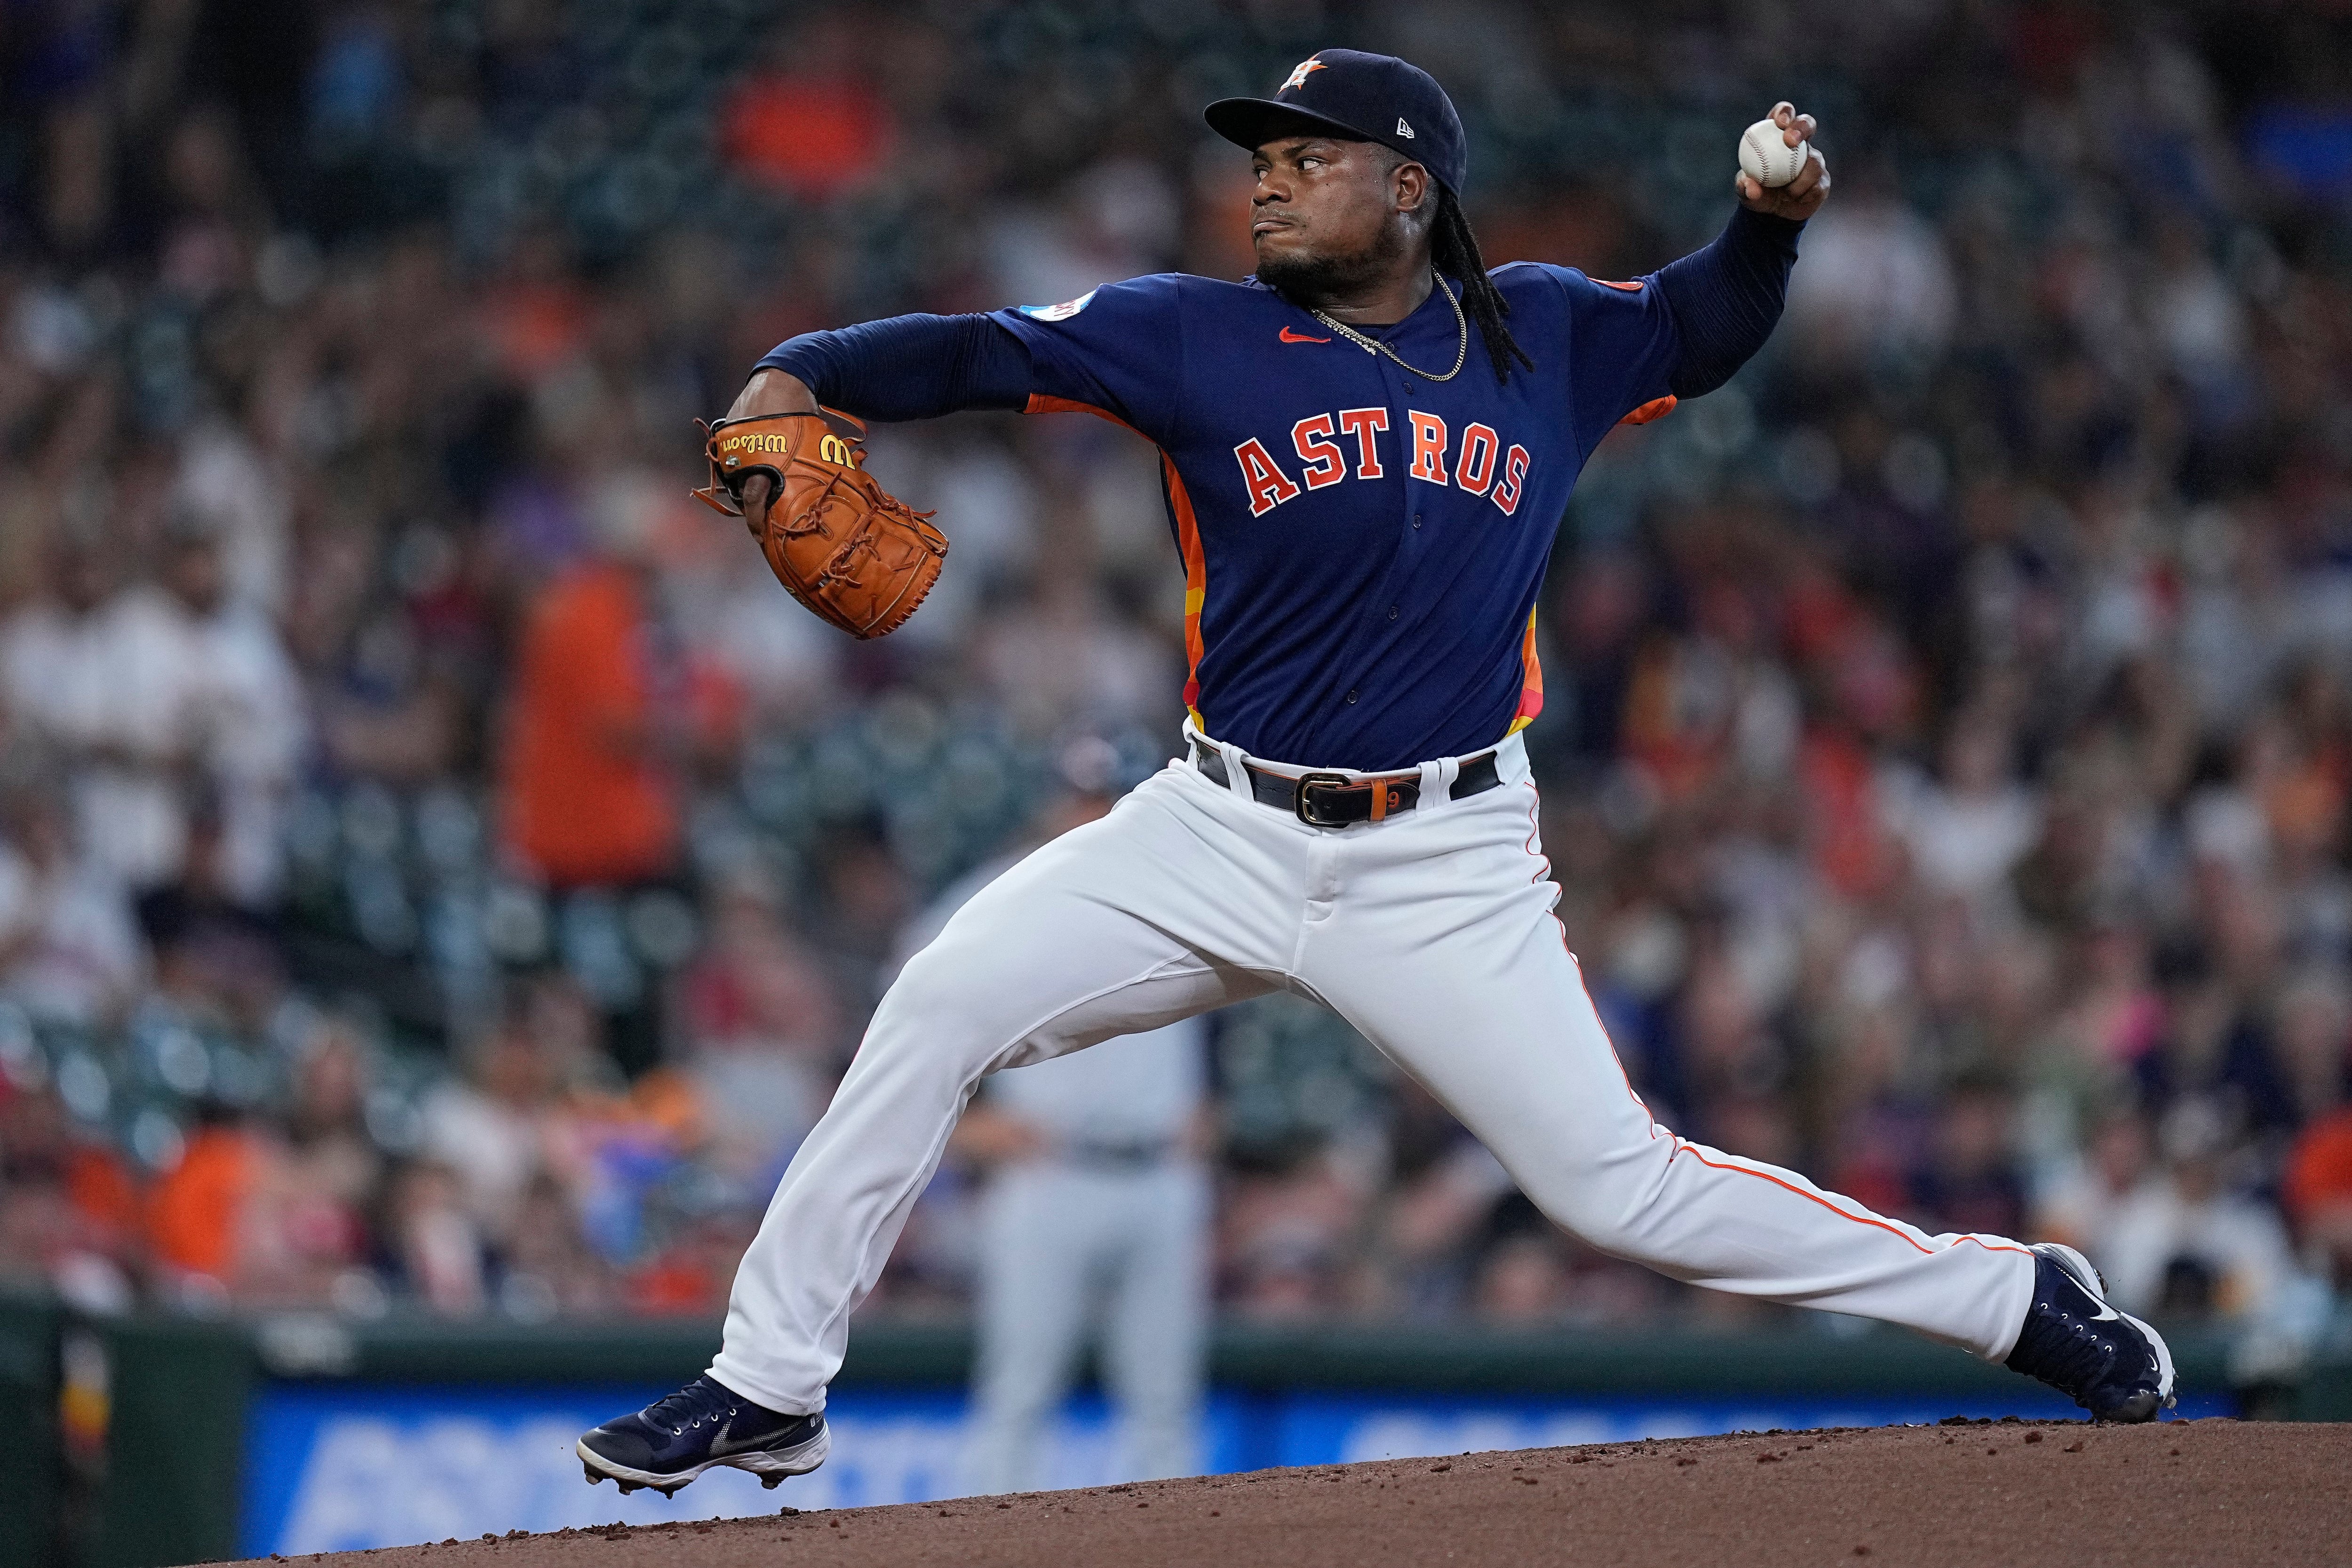 Astros announce Framber Valdez as Opening Day pitcher